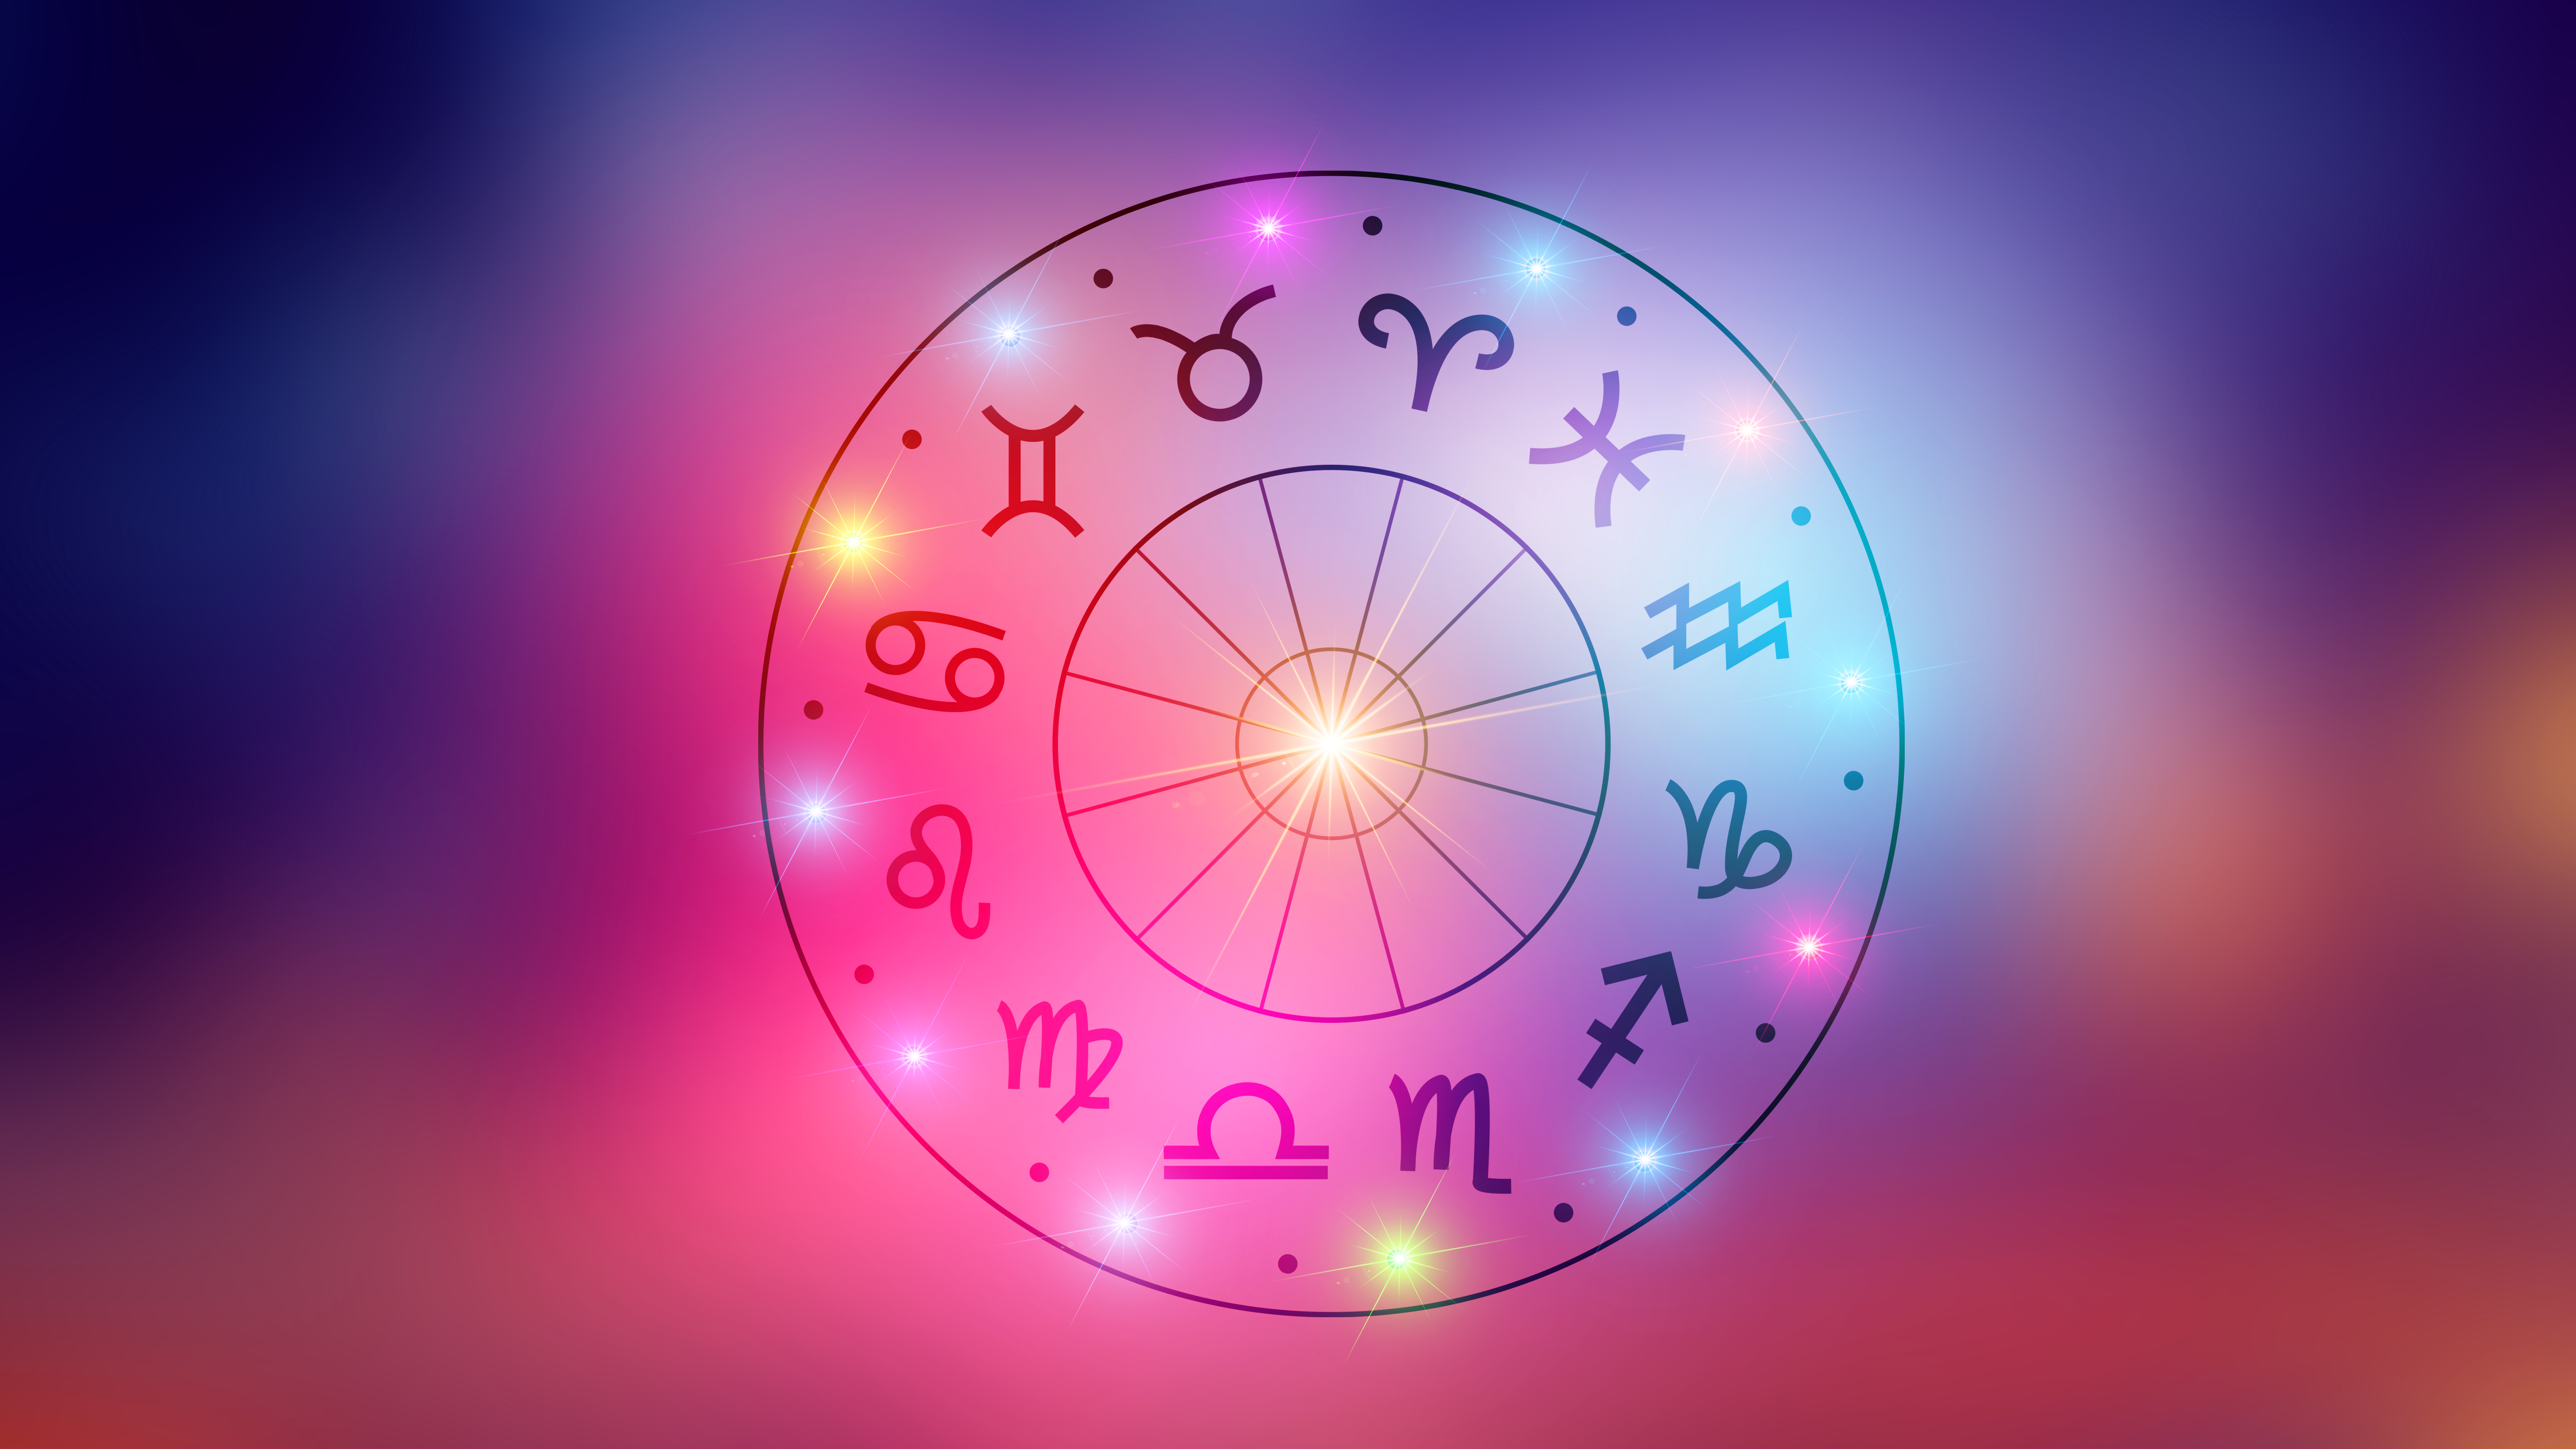 Photo of zodiac signs inside of horoscope circle. | Source: Getty Images